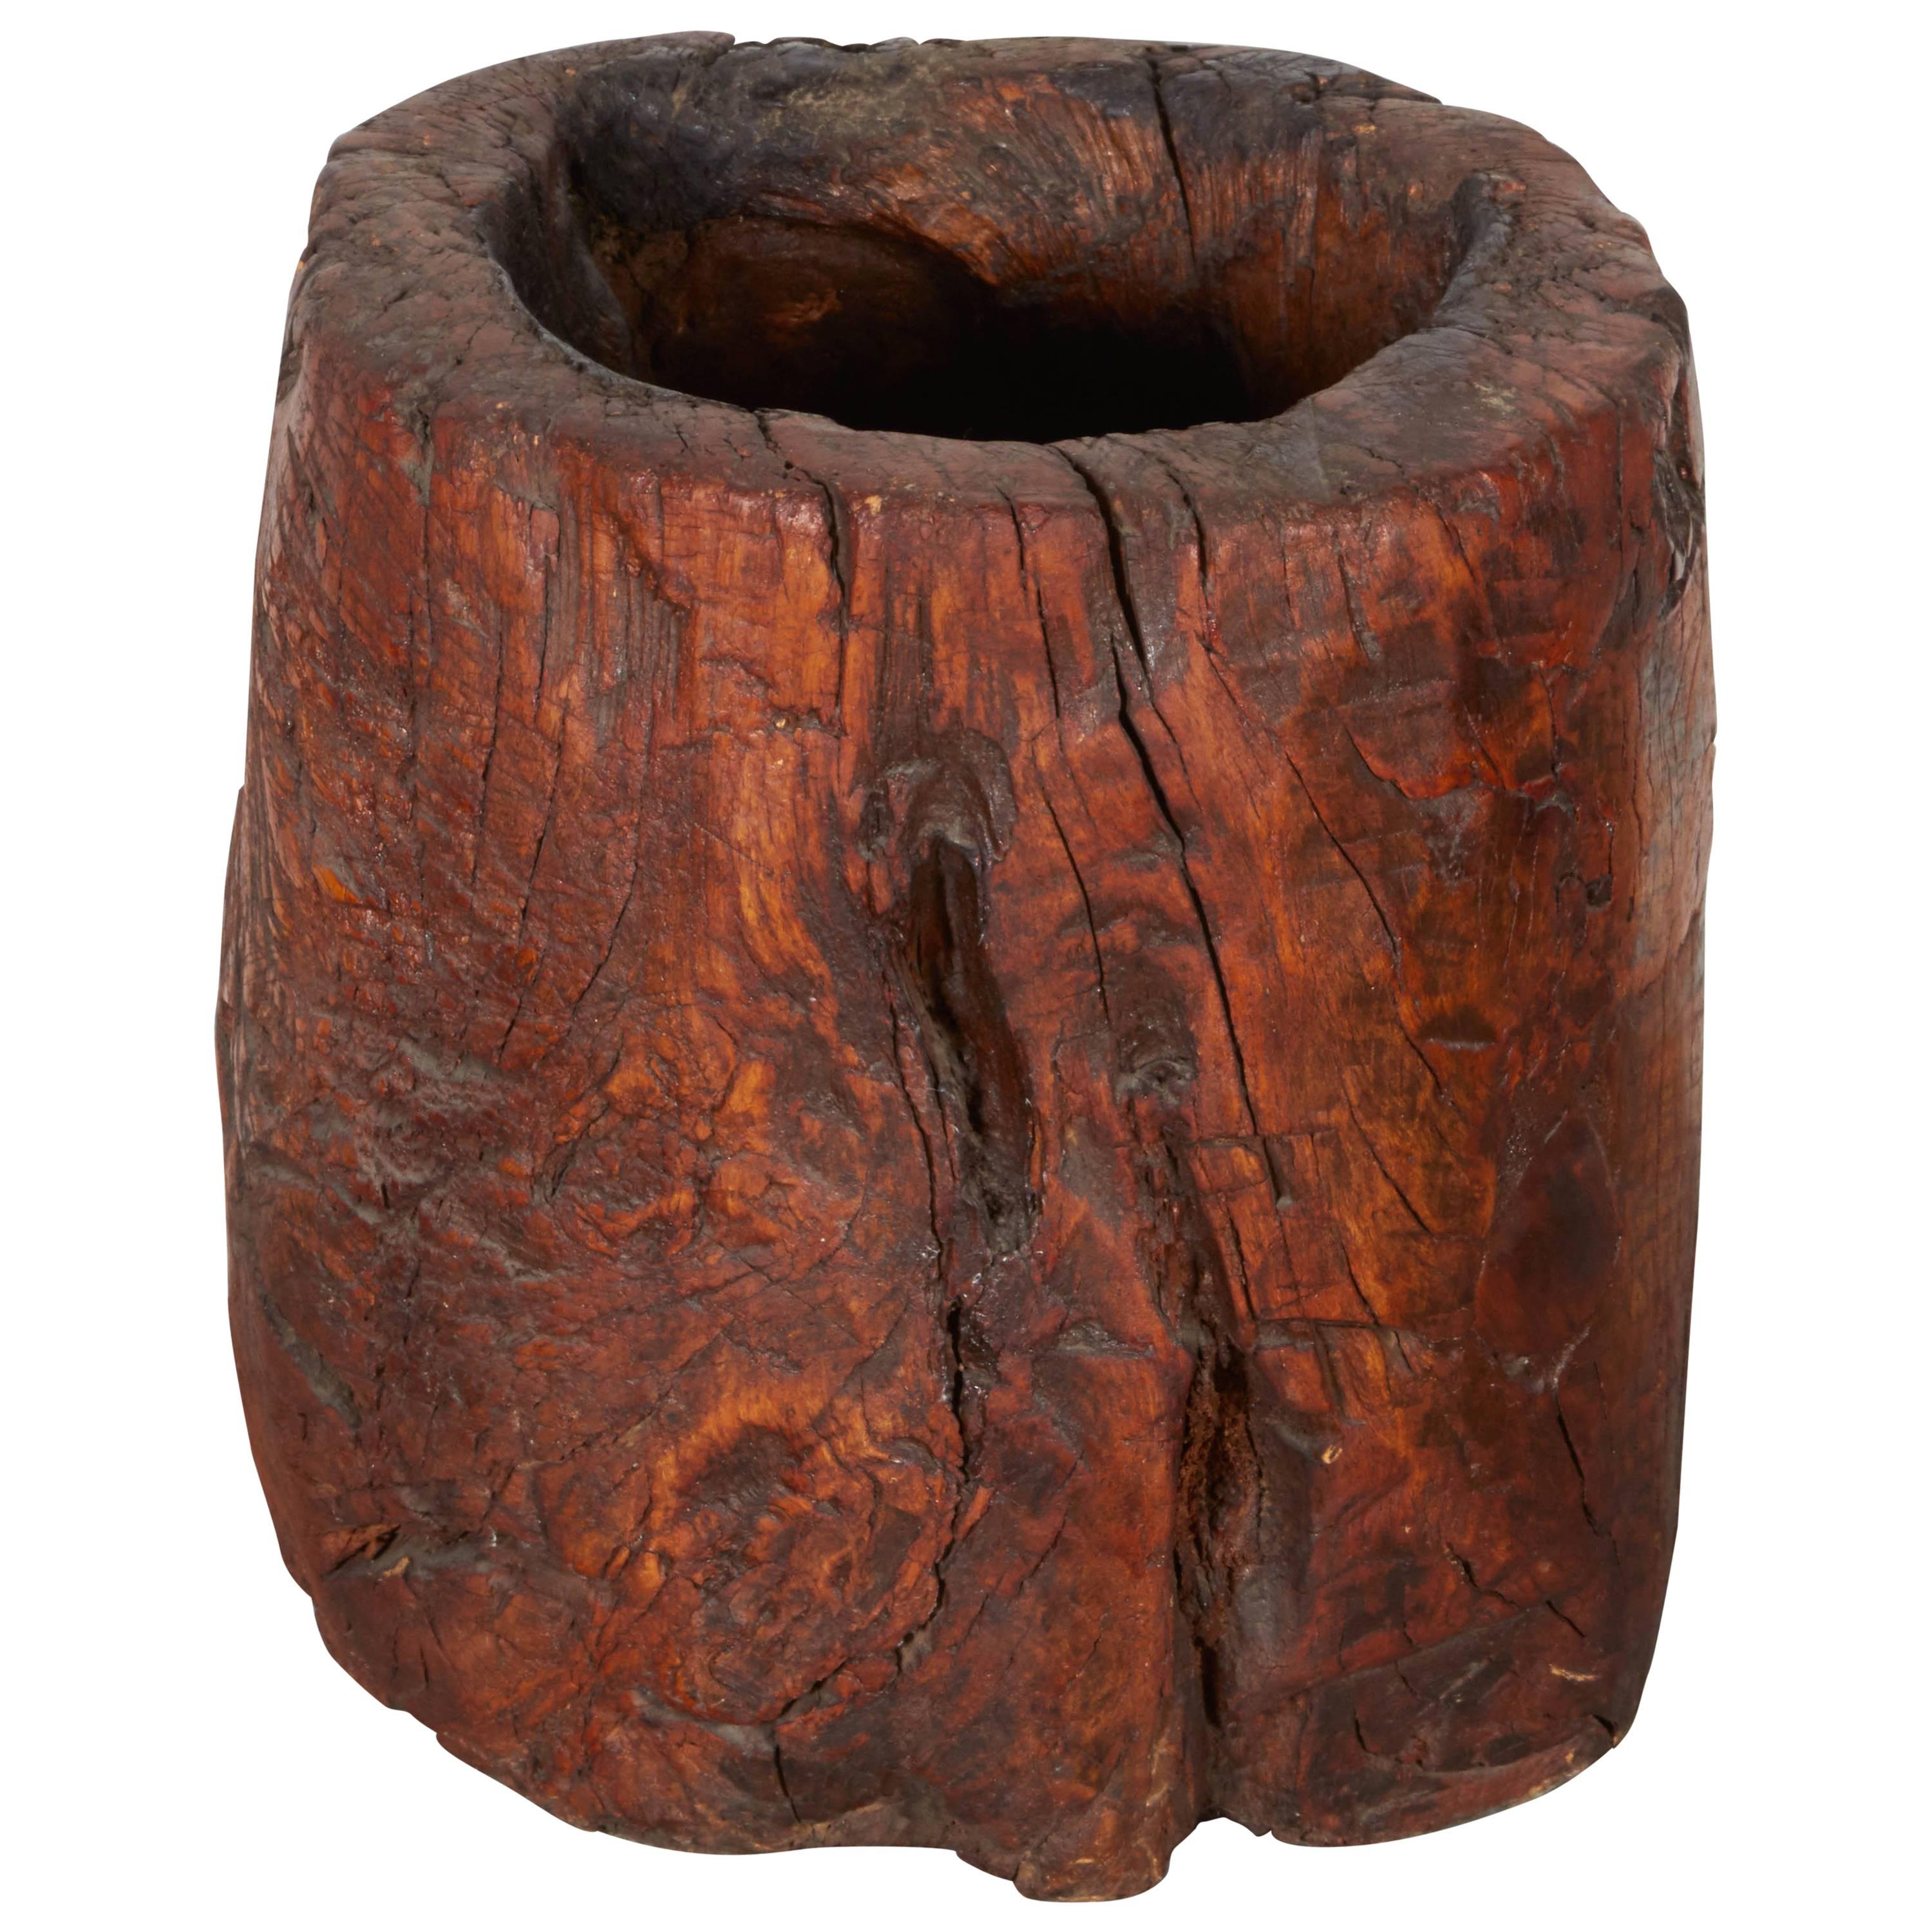 Unusually Large, Thick Walled Antique Burl Wood Mortar For Sale